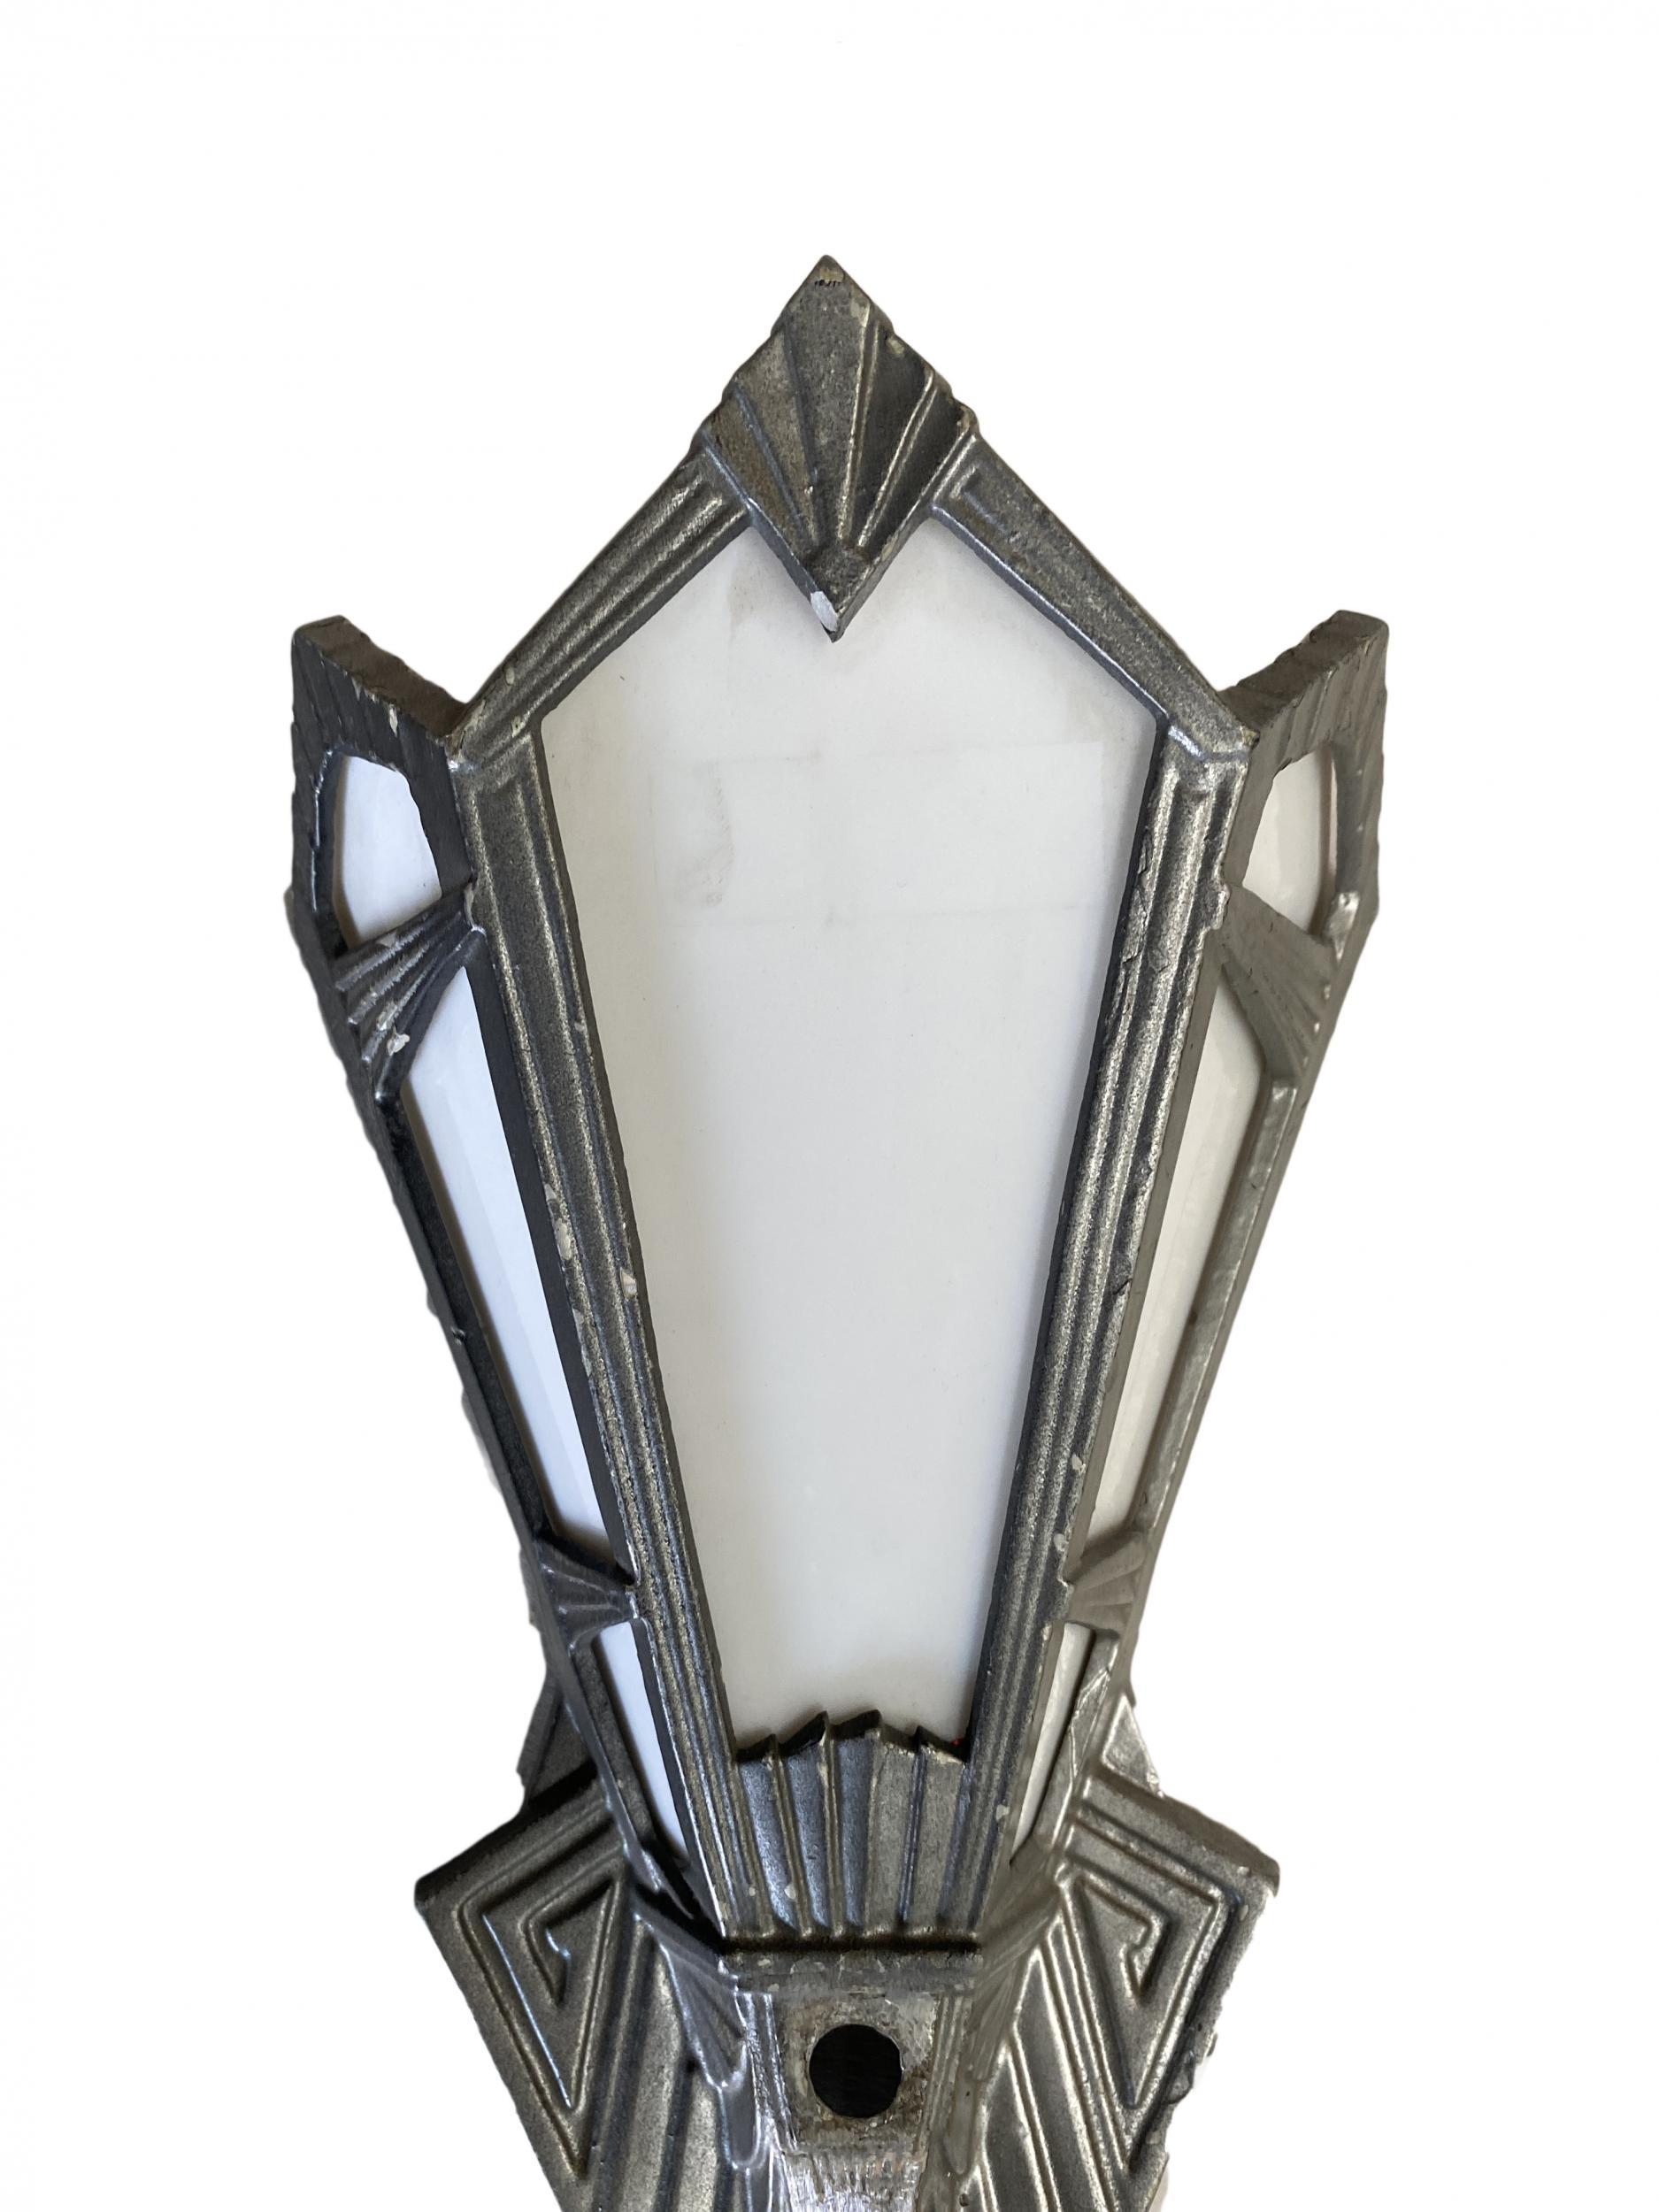 American Elegant Geometric Art Deco Slat Glass Wall Sconce, Available 5 For Sale